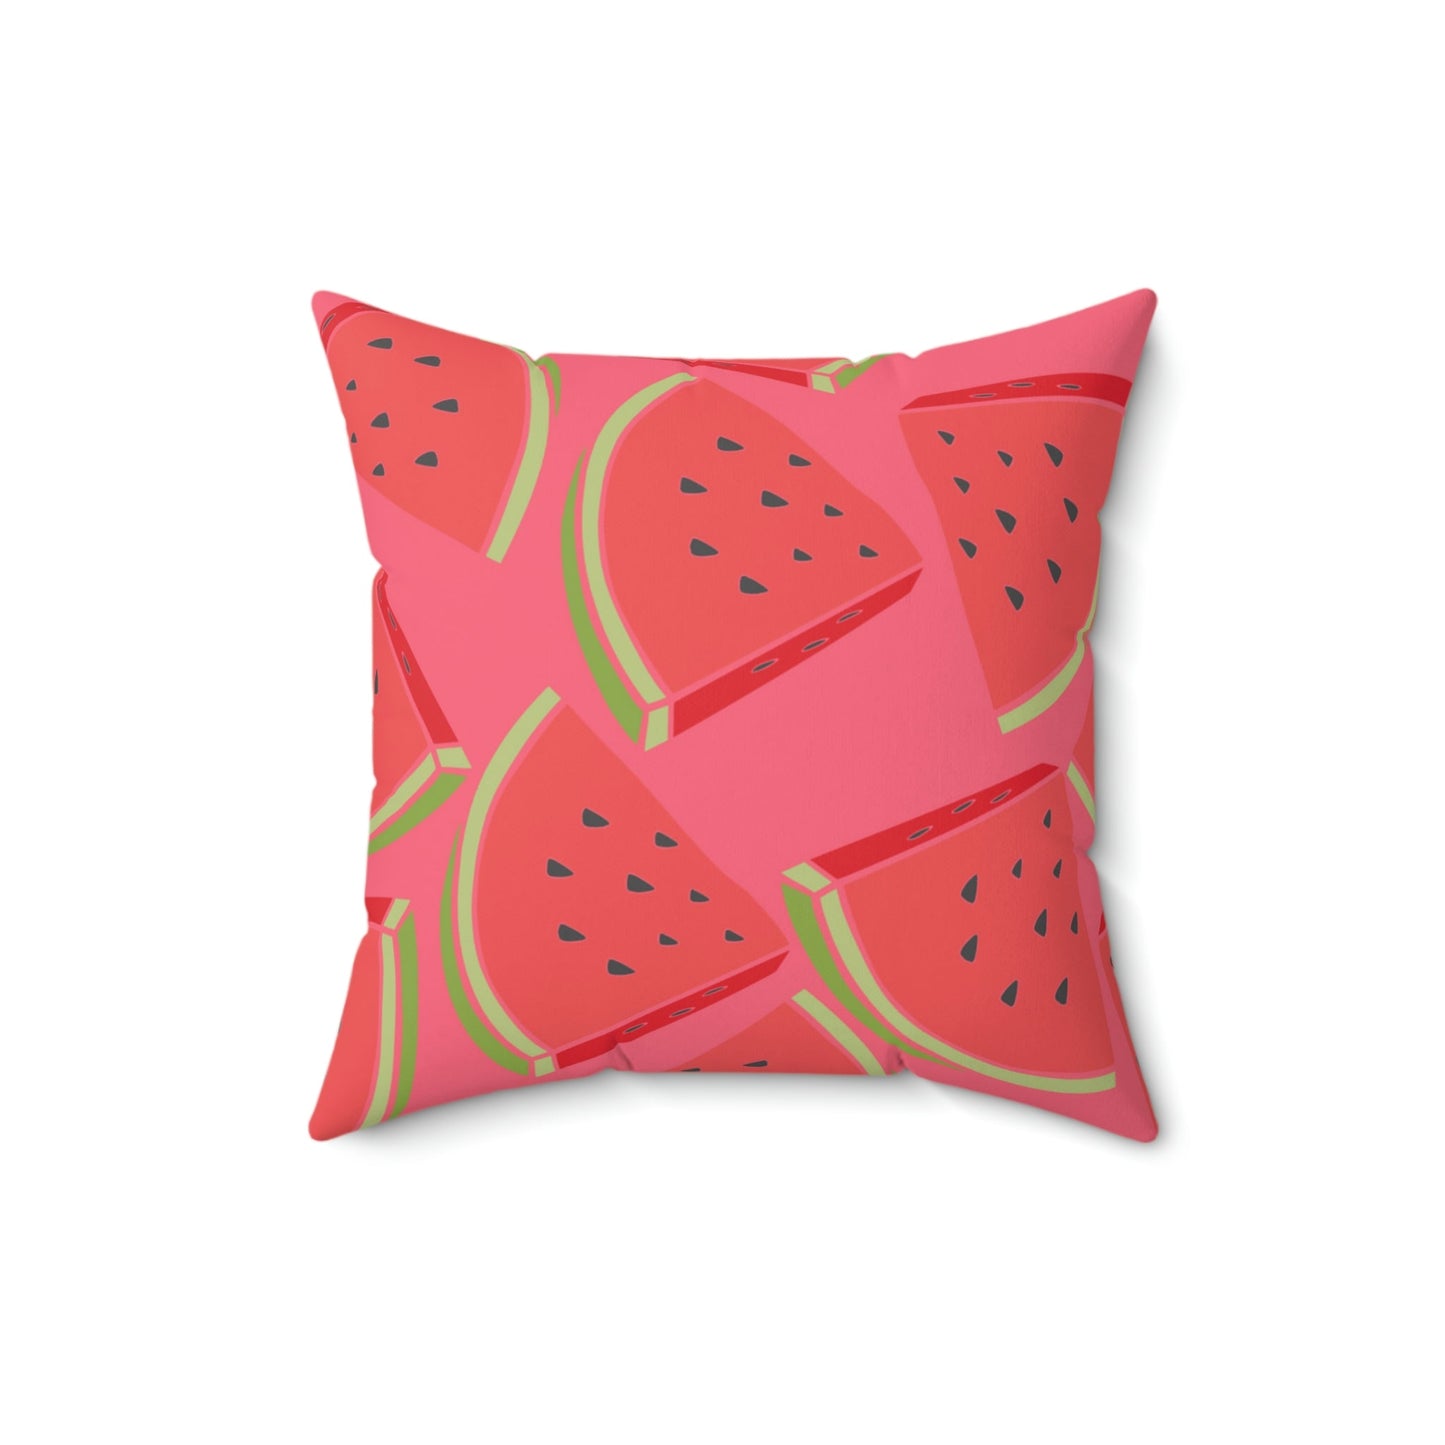 Juicy Summer Watermelon Square Pillow Home Decor Pink Sweetheart